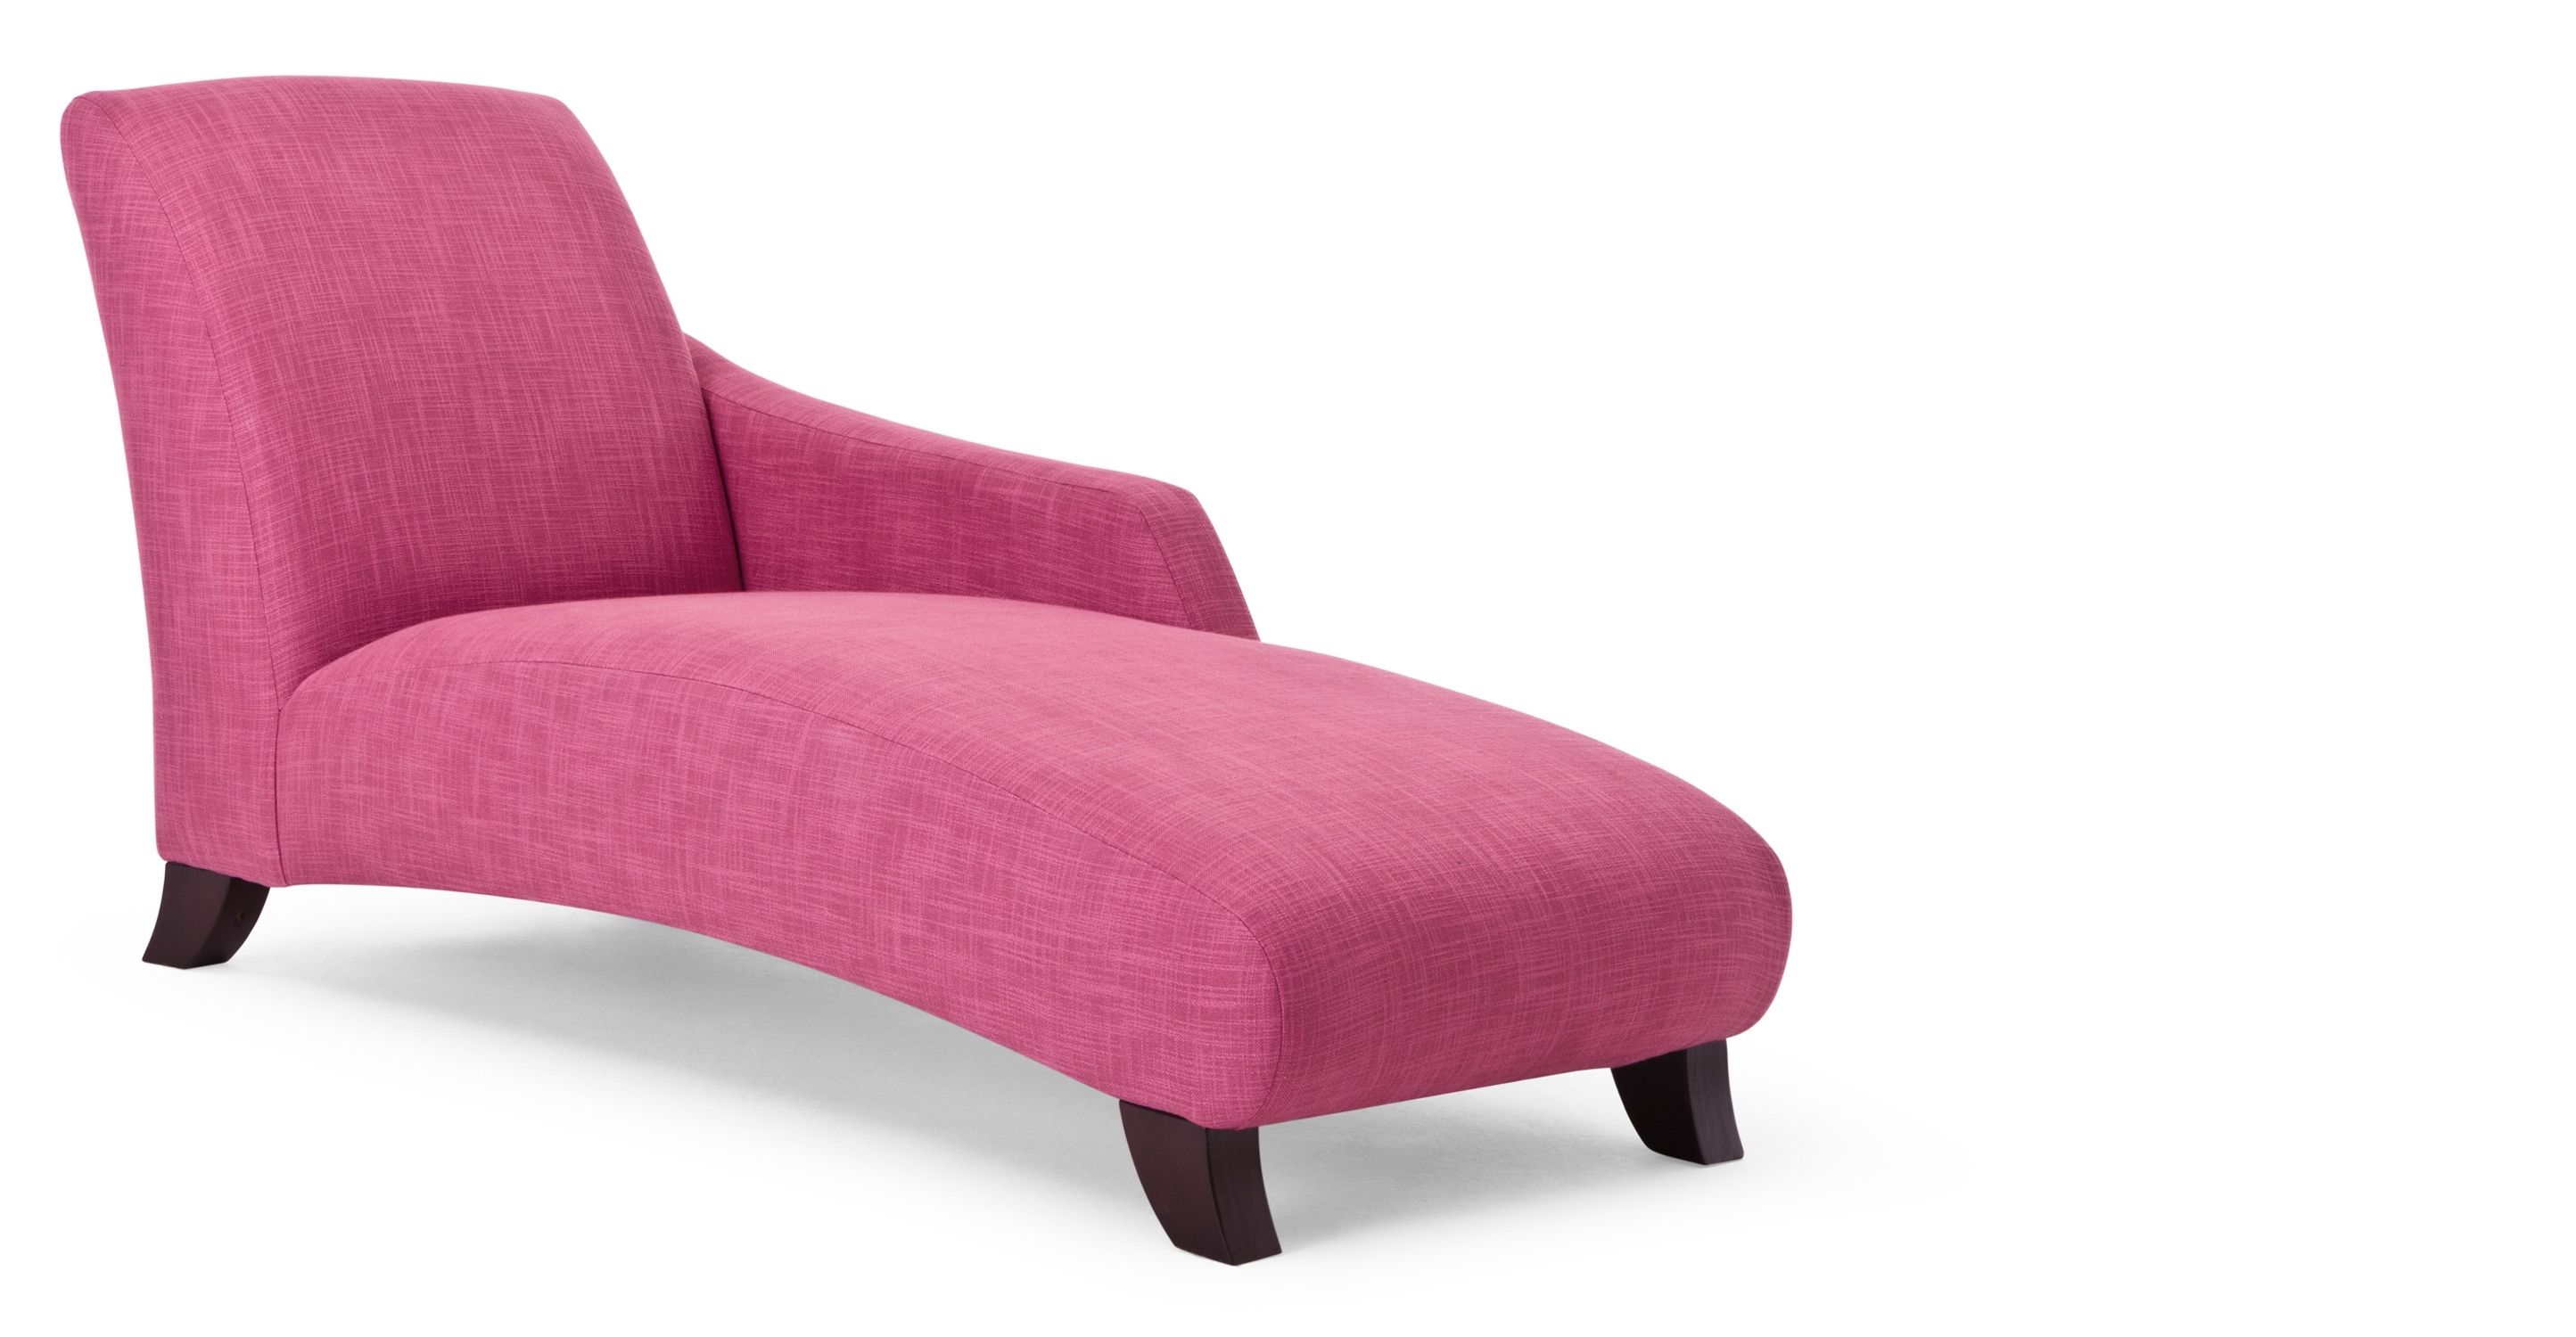 Latest Pink Chaise Lounges With Regard To Bedroom: Chaise Lounge Chair For Bedroom In Pink Theme Made Of (View 9 of 15)